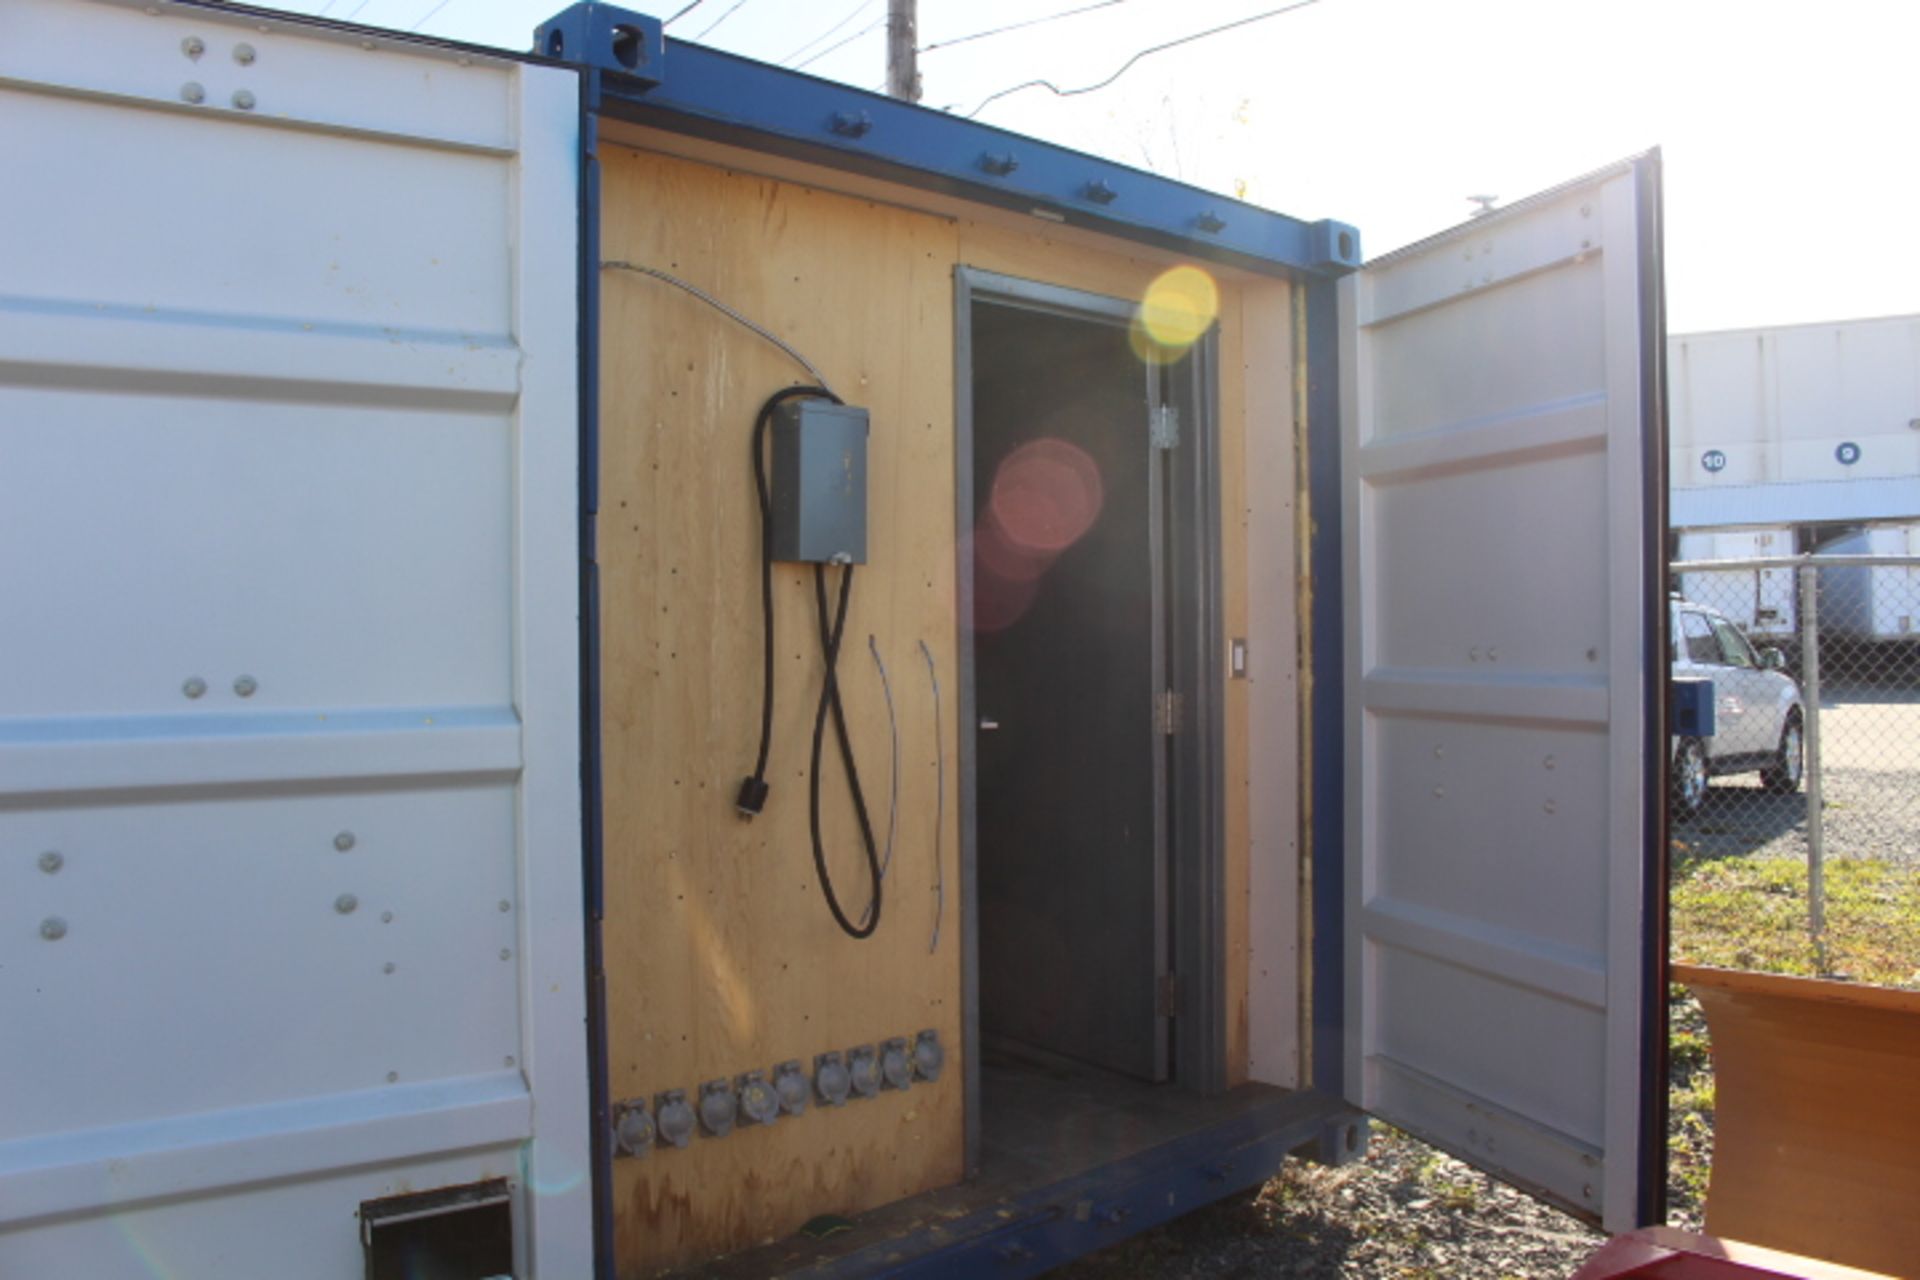 Storage/work sea can 8'6" H x 20' L insulated & wired w/200A panel - Image 5 of 6